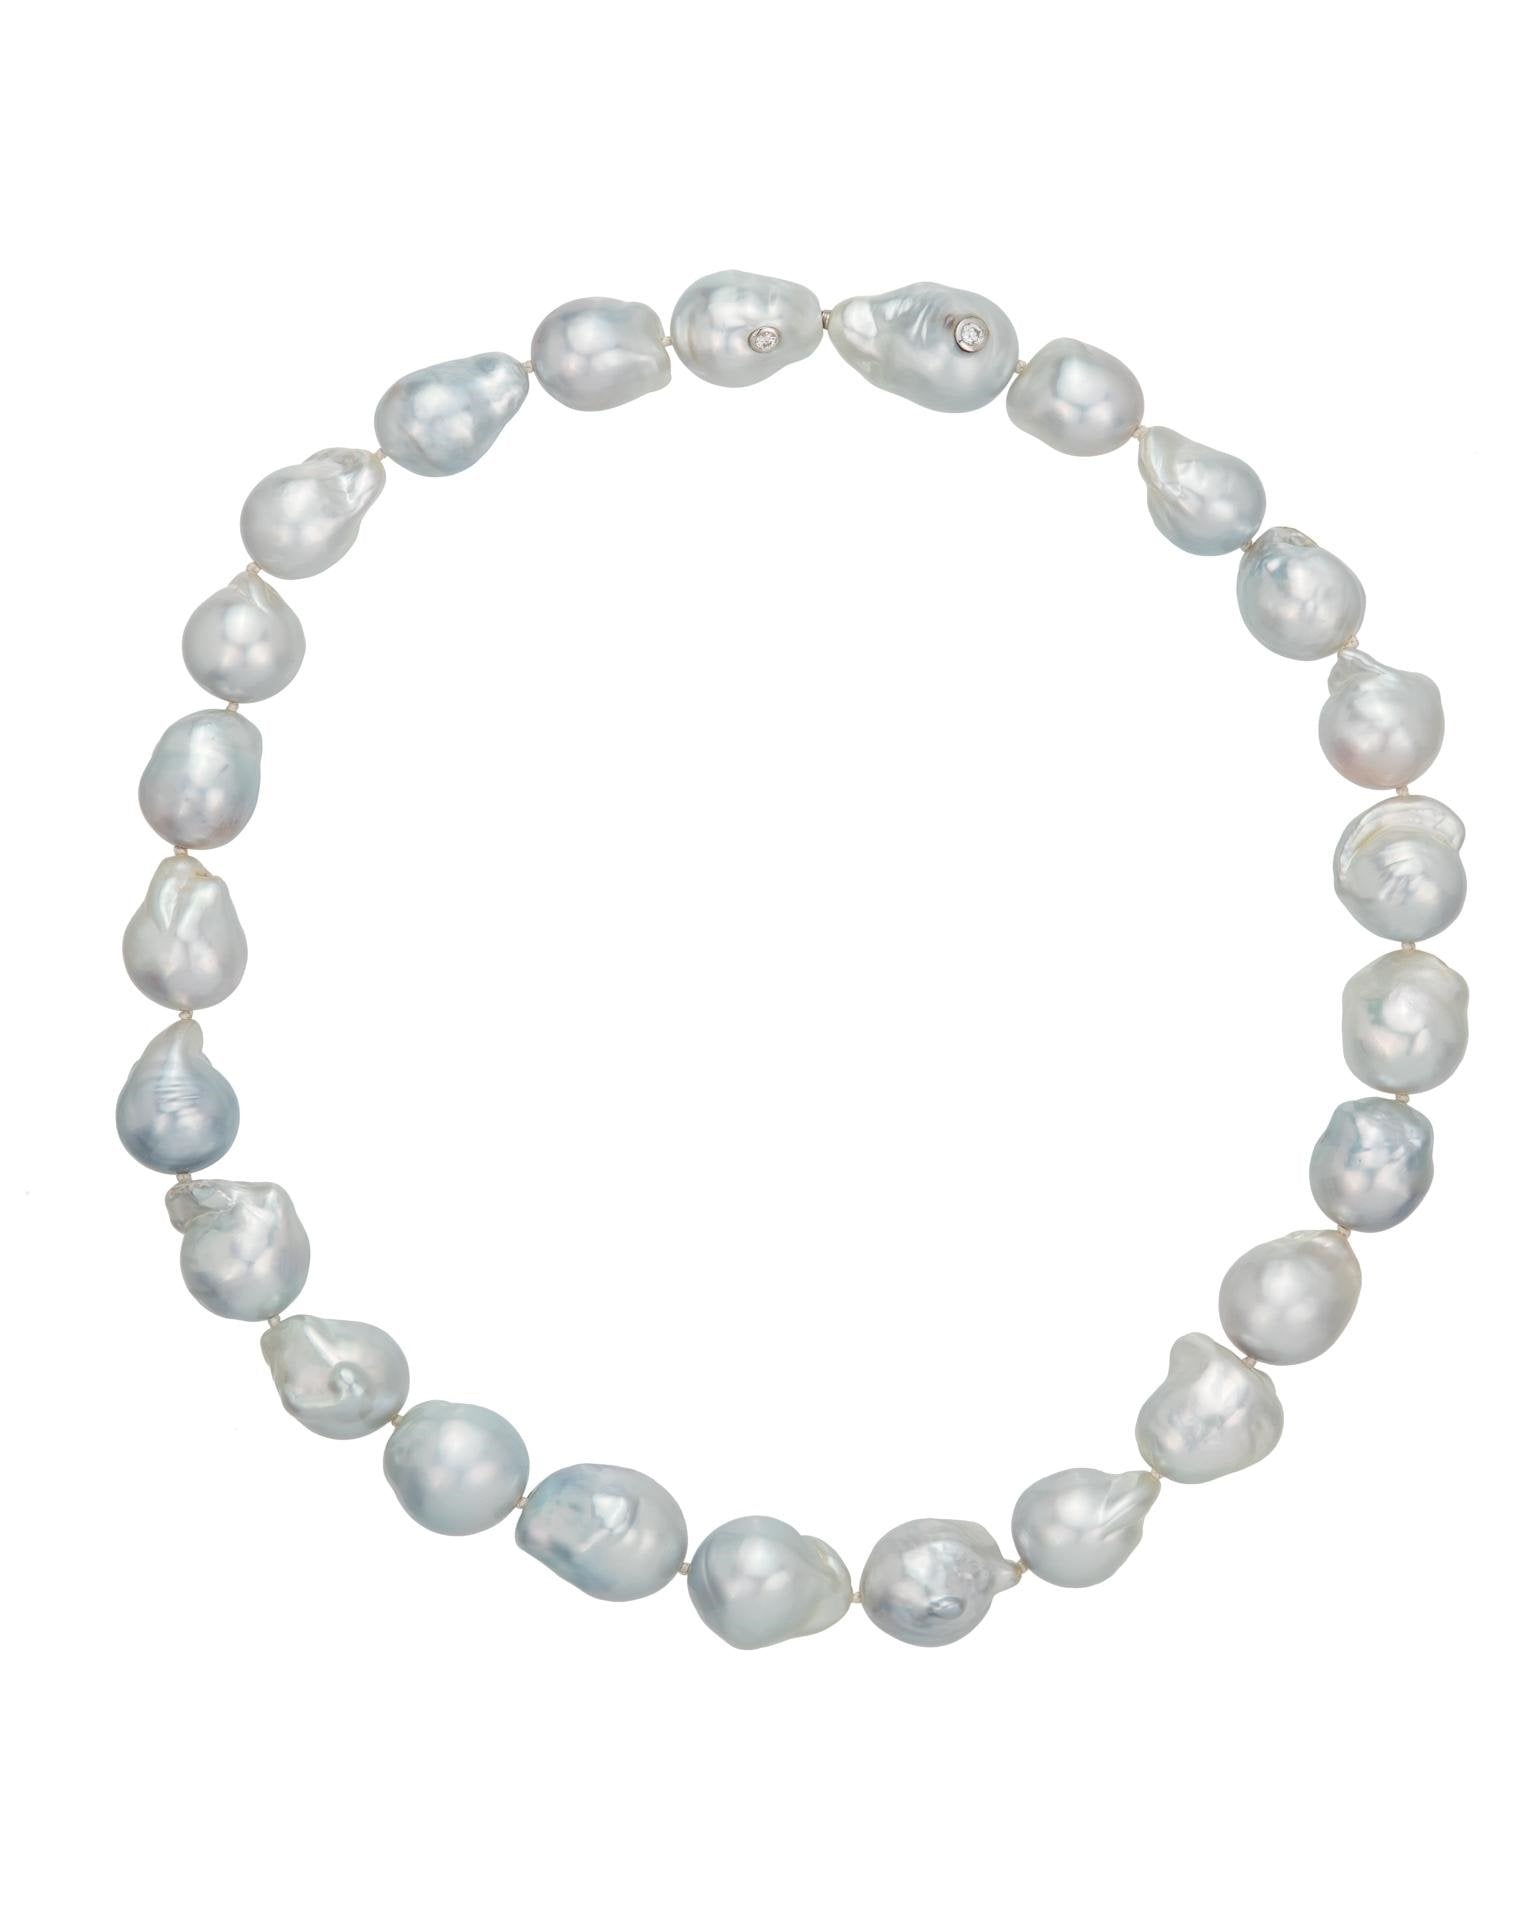 South Sea baroque pearl strand, with hidden bayonet clasp, crafted in 18 karat white gold.